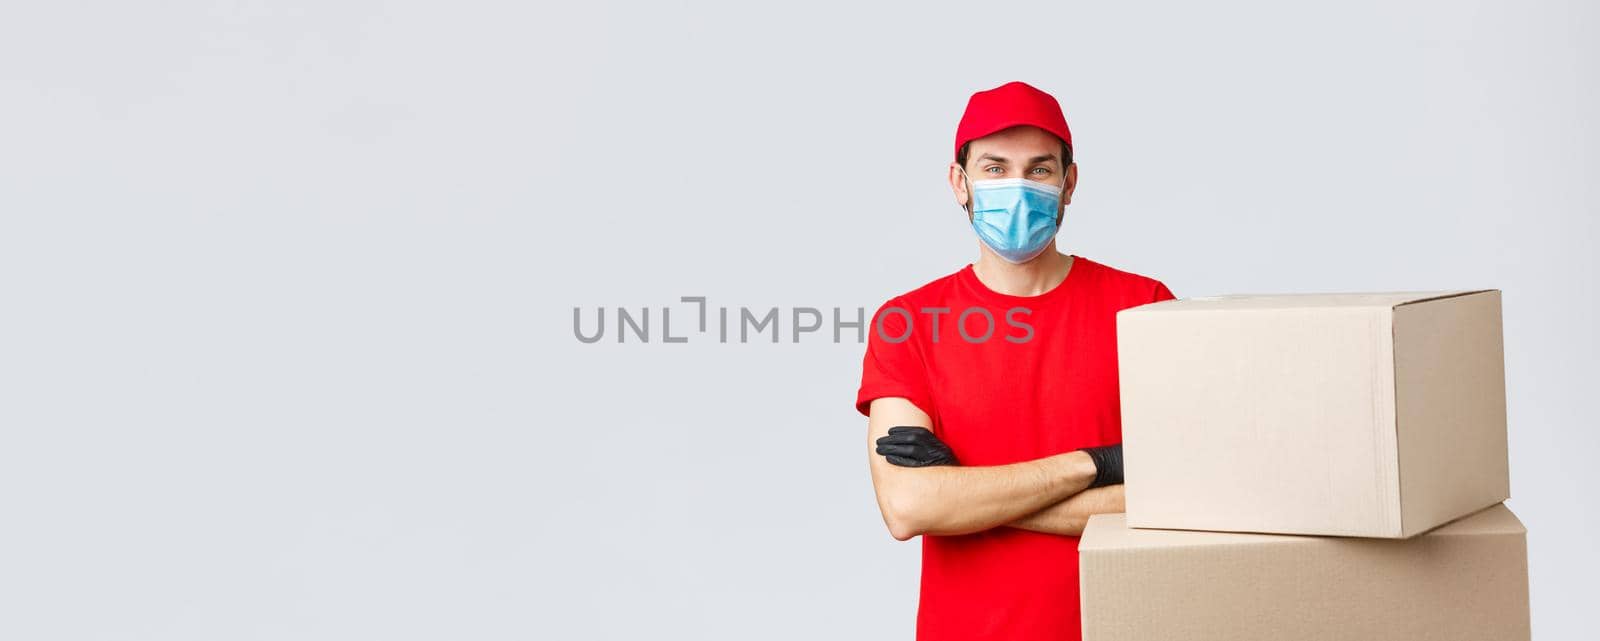 Packages and parcels delivery, covid-19 quarantine and transfer orders. Confident young courier in red uniform, gloves and medical mask, cross arms as standing boxes, grey background by Benzoix